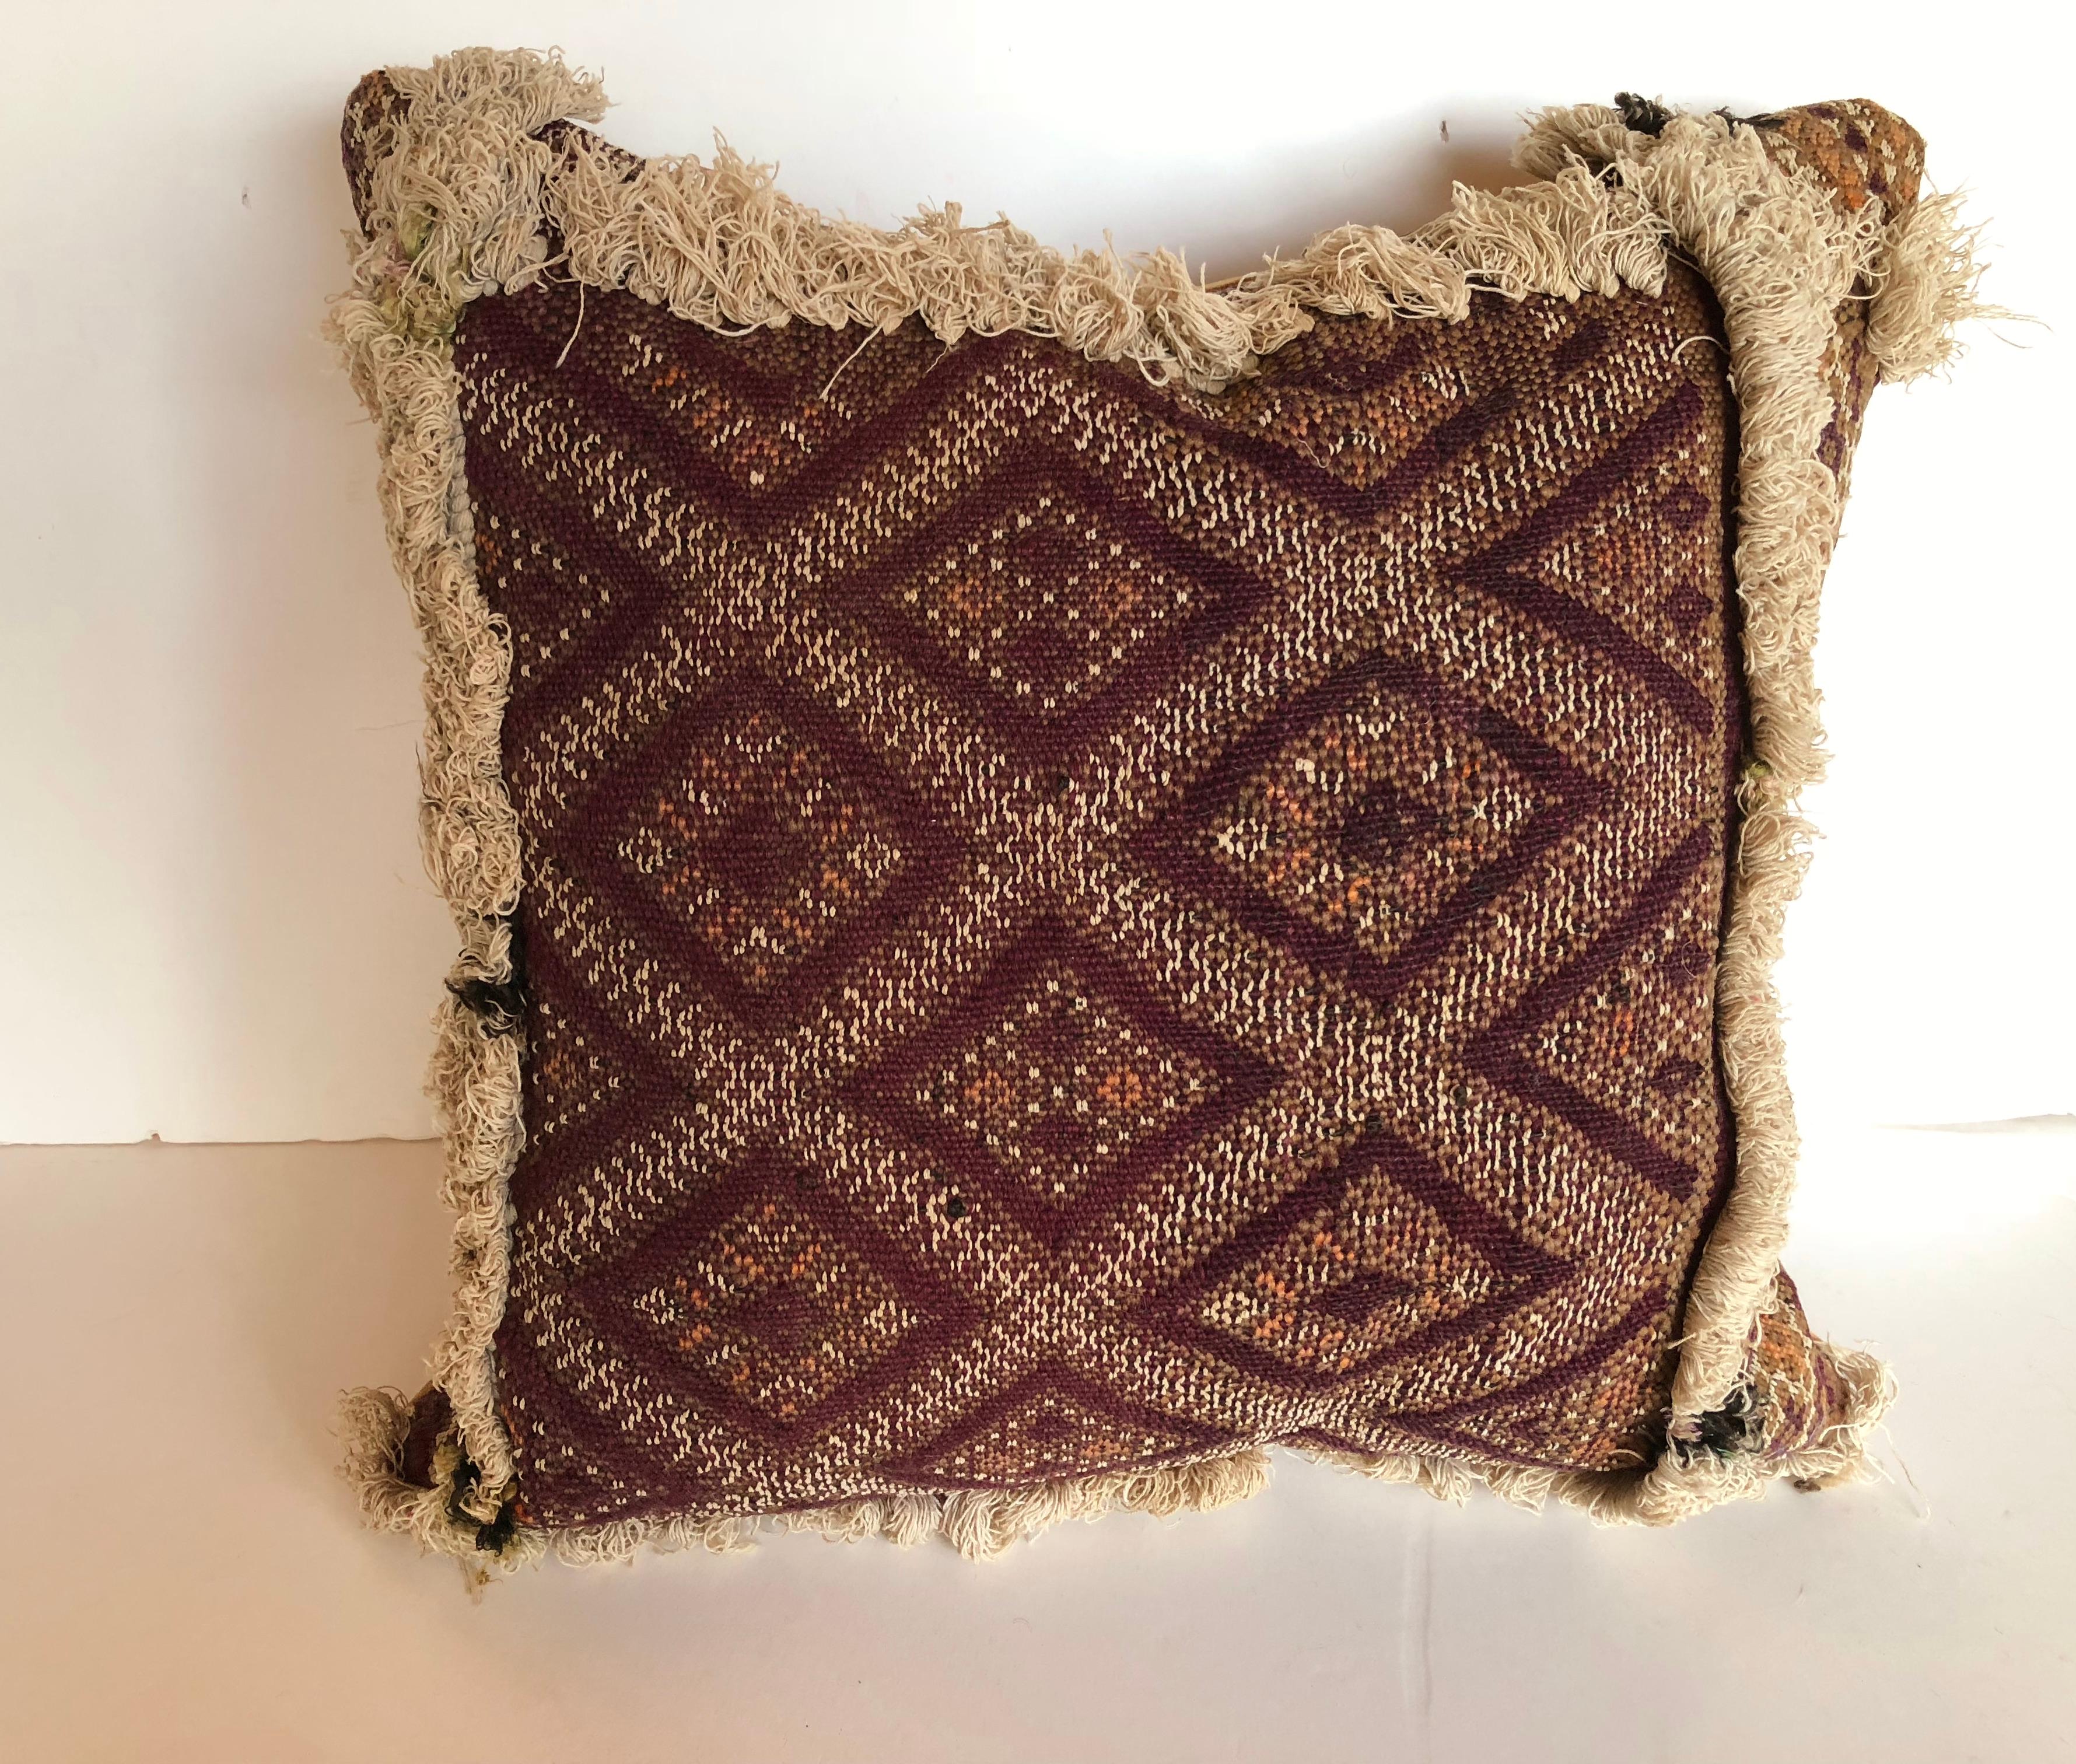 Custom pillow cut from a 100 year old hand loomed wool Moroccan rug from the Atlas Mountains. Each panel on the 20ft long rug was a different design separated by ivory tufting. Rich colors in purple, brown, orange and ivory. Pillow is backed in